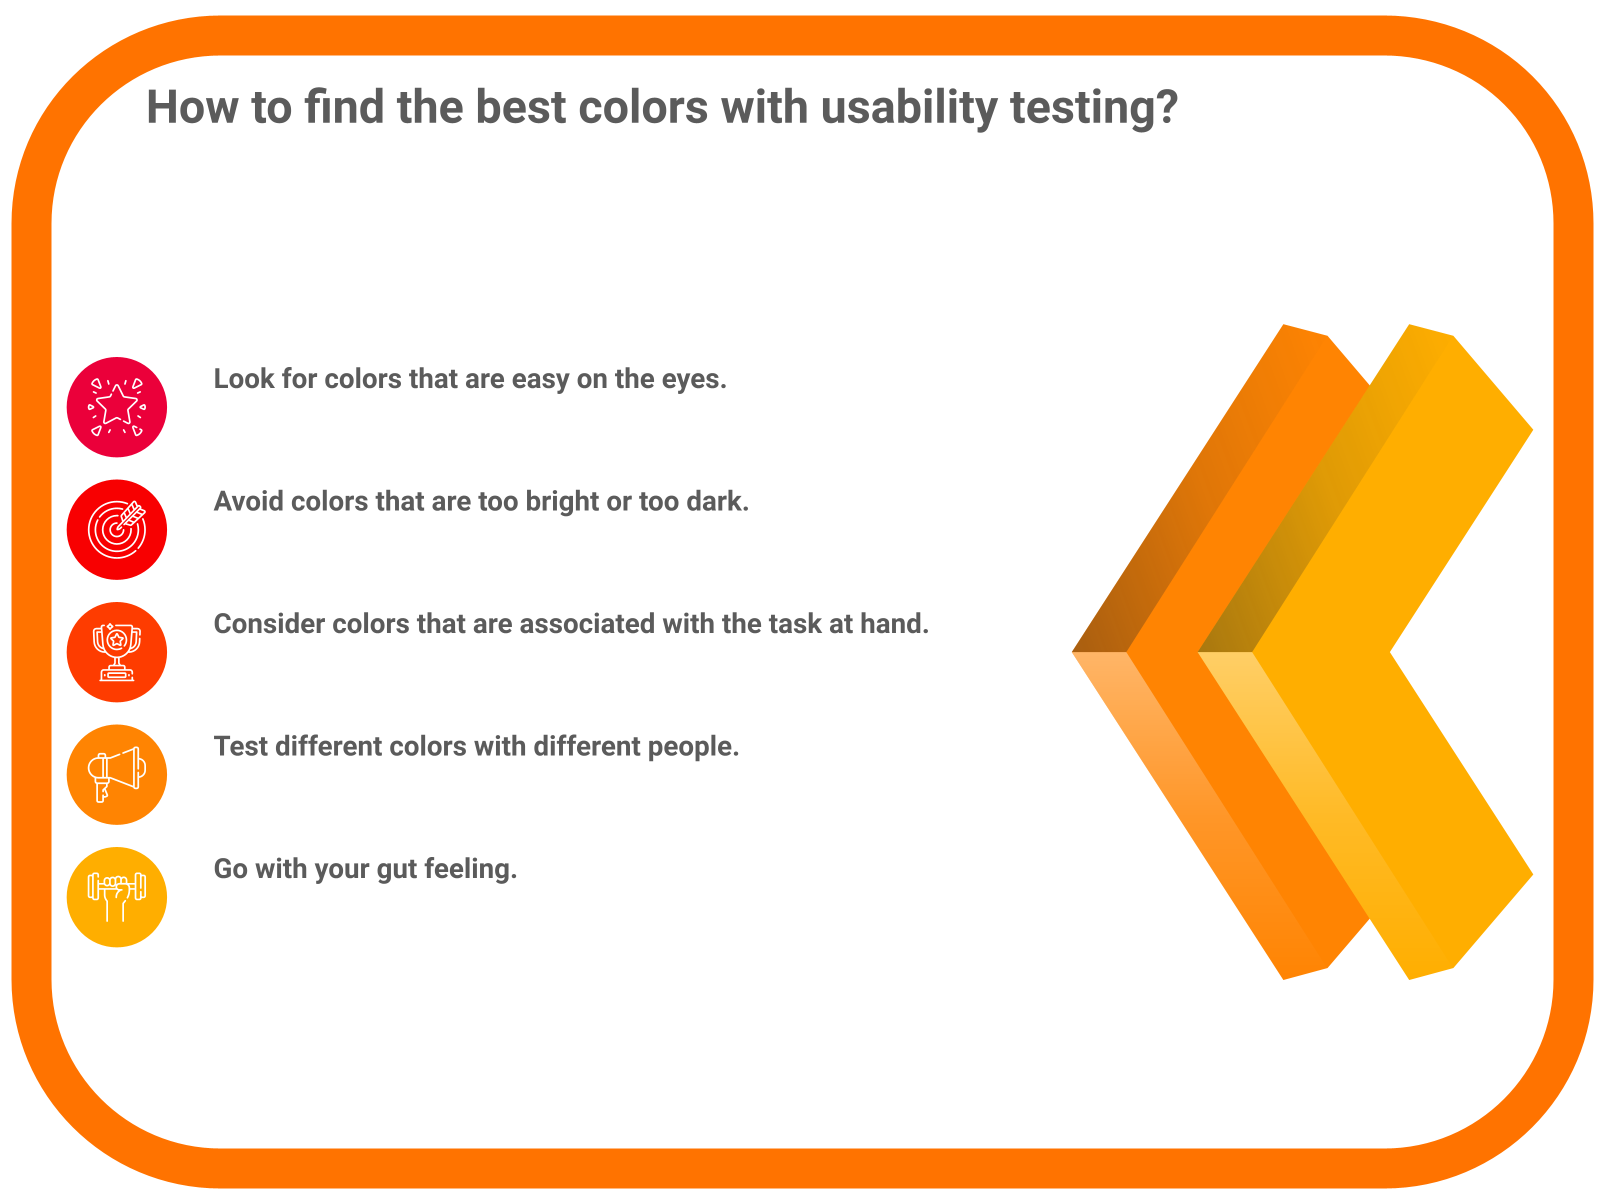 How to find the best colors with usability testing?